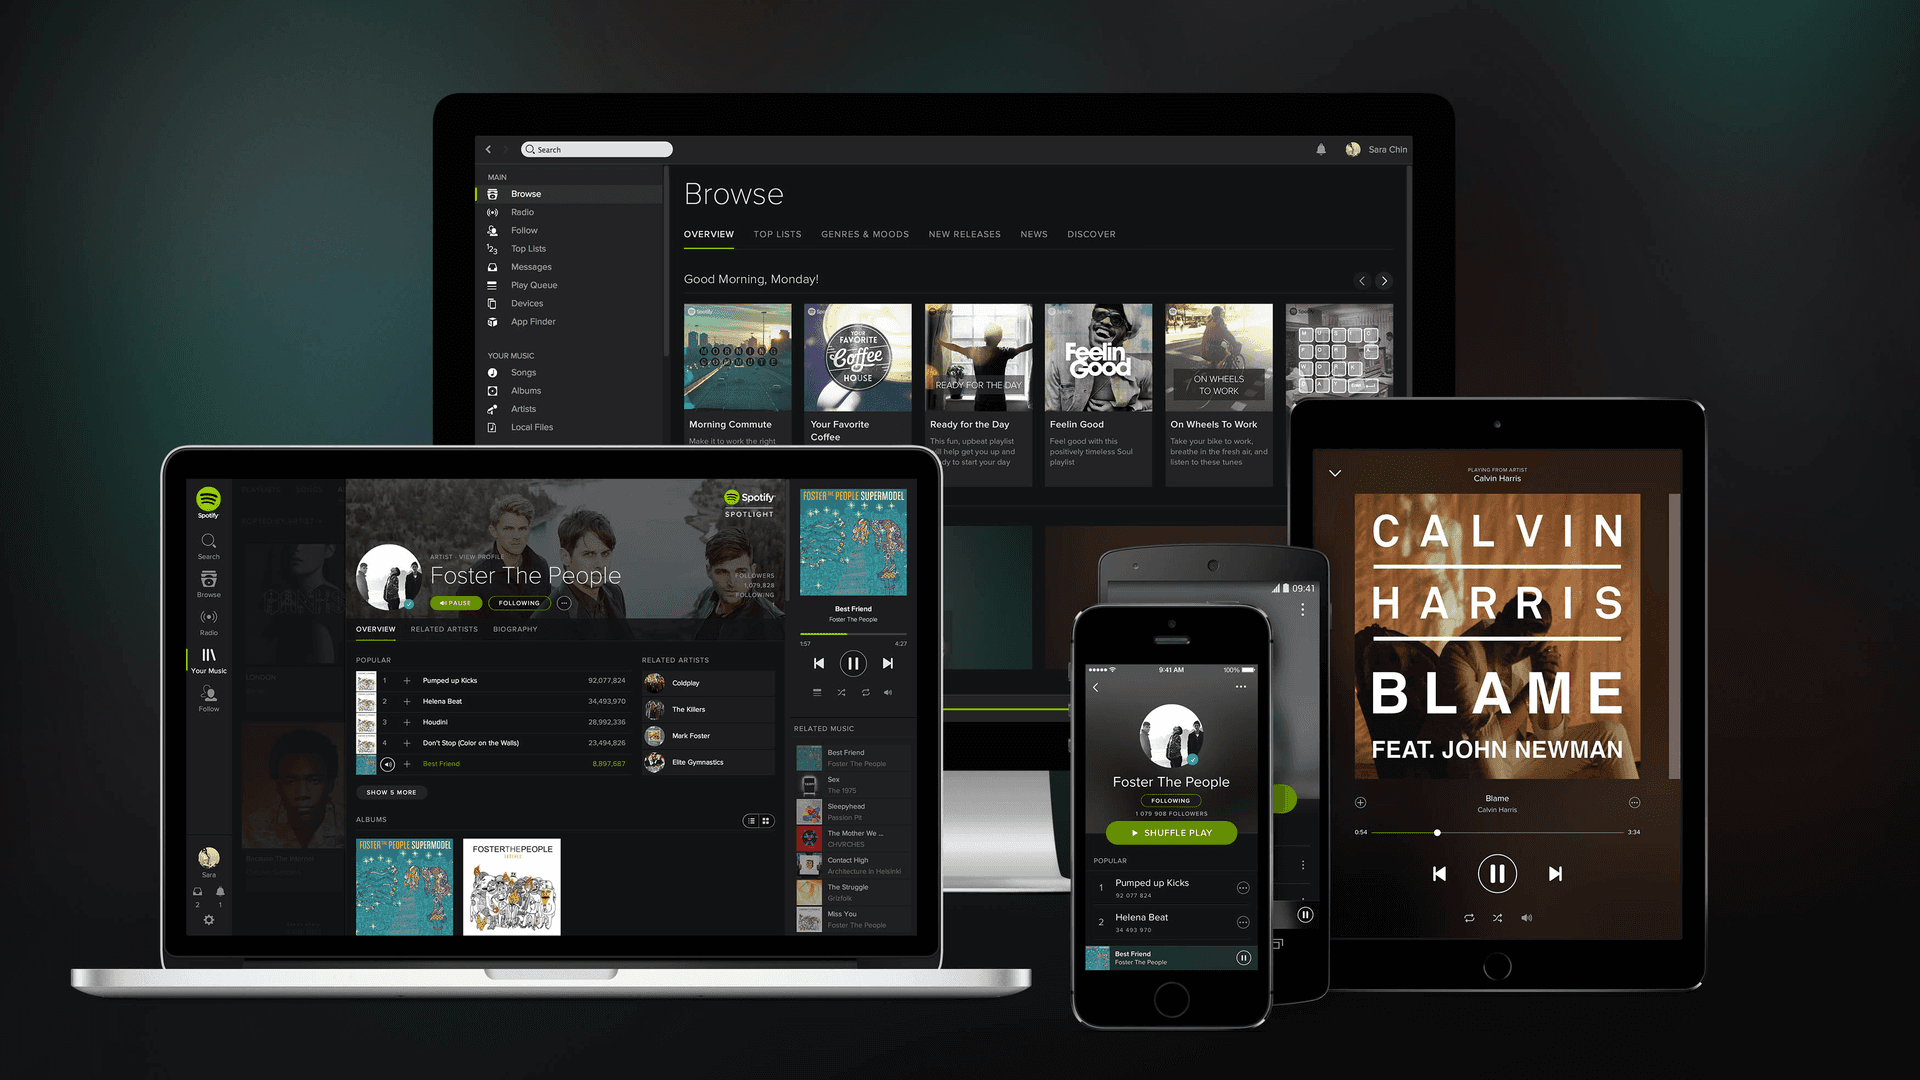 Spotify devices